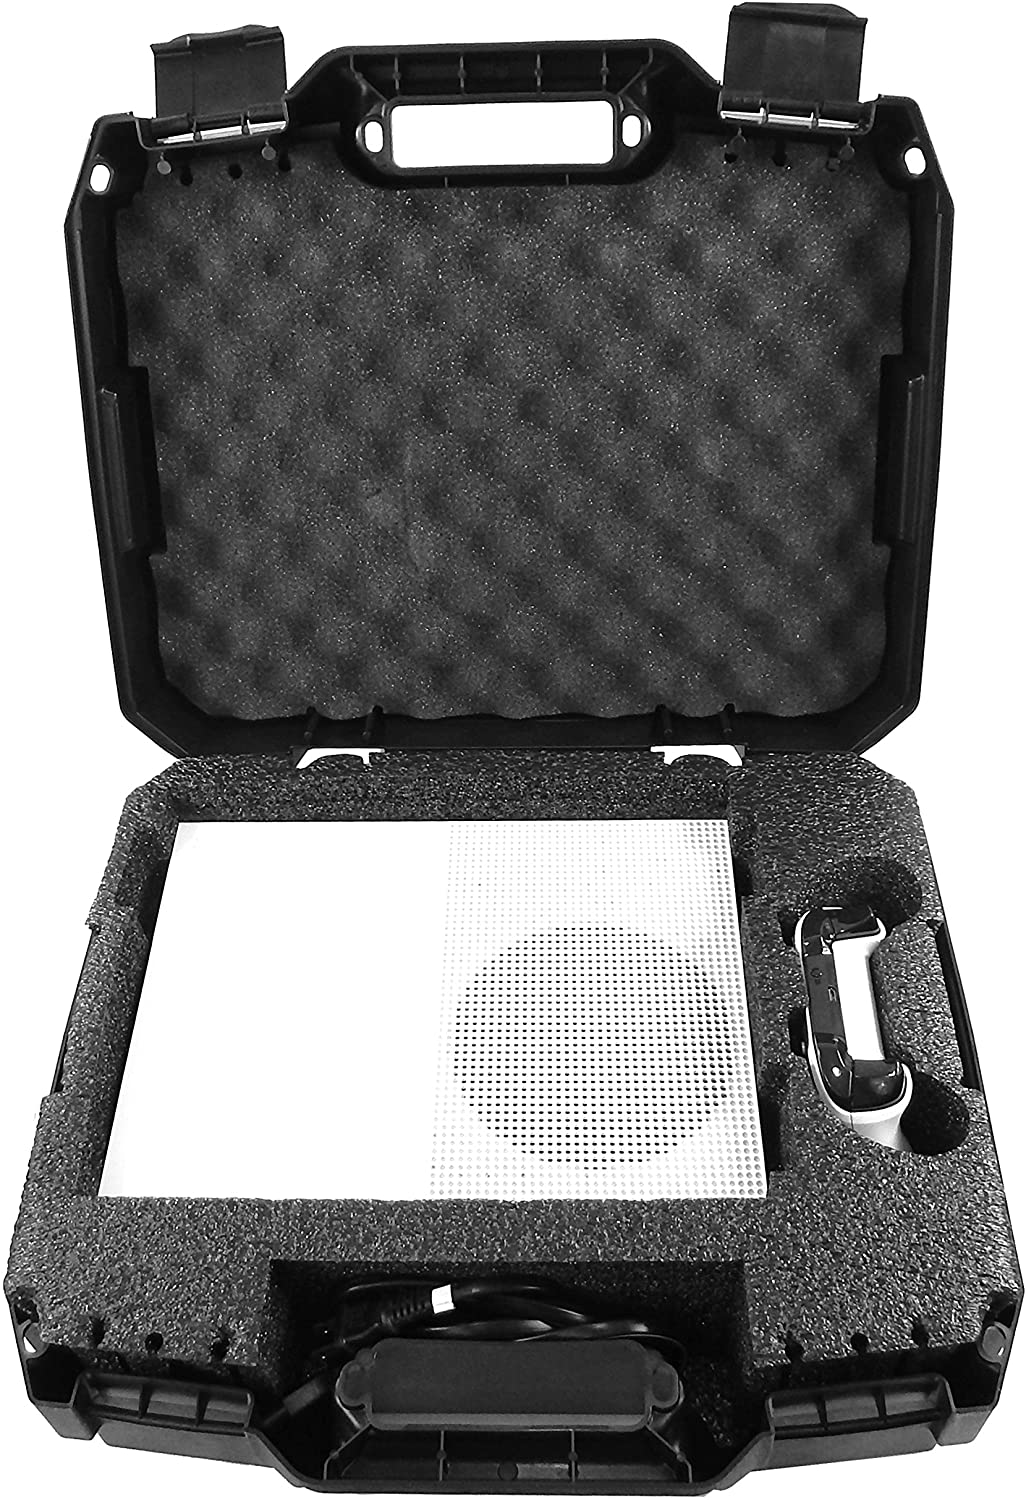 Casematix Xbox Series X Travel Carrying Protection Case Box